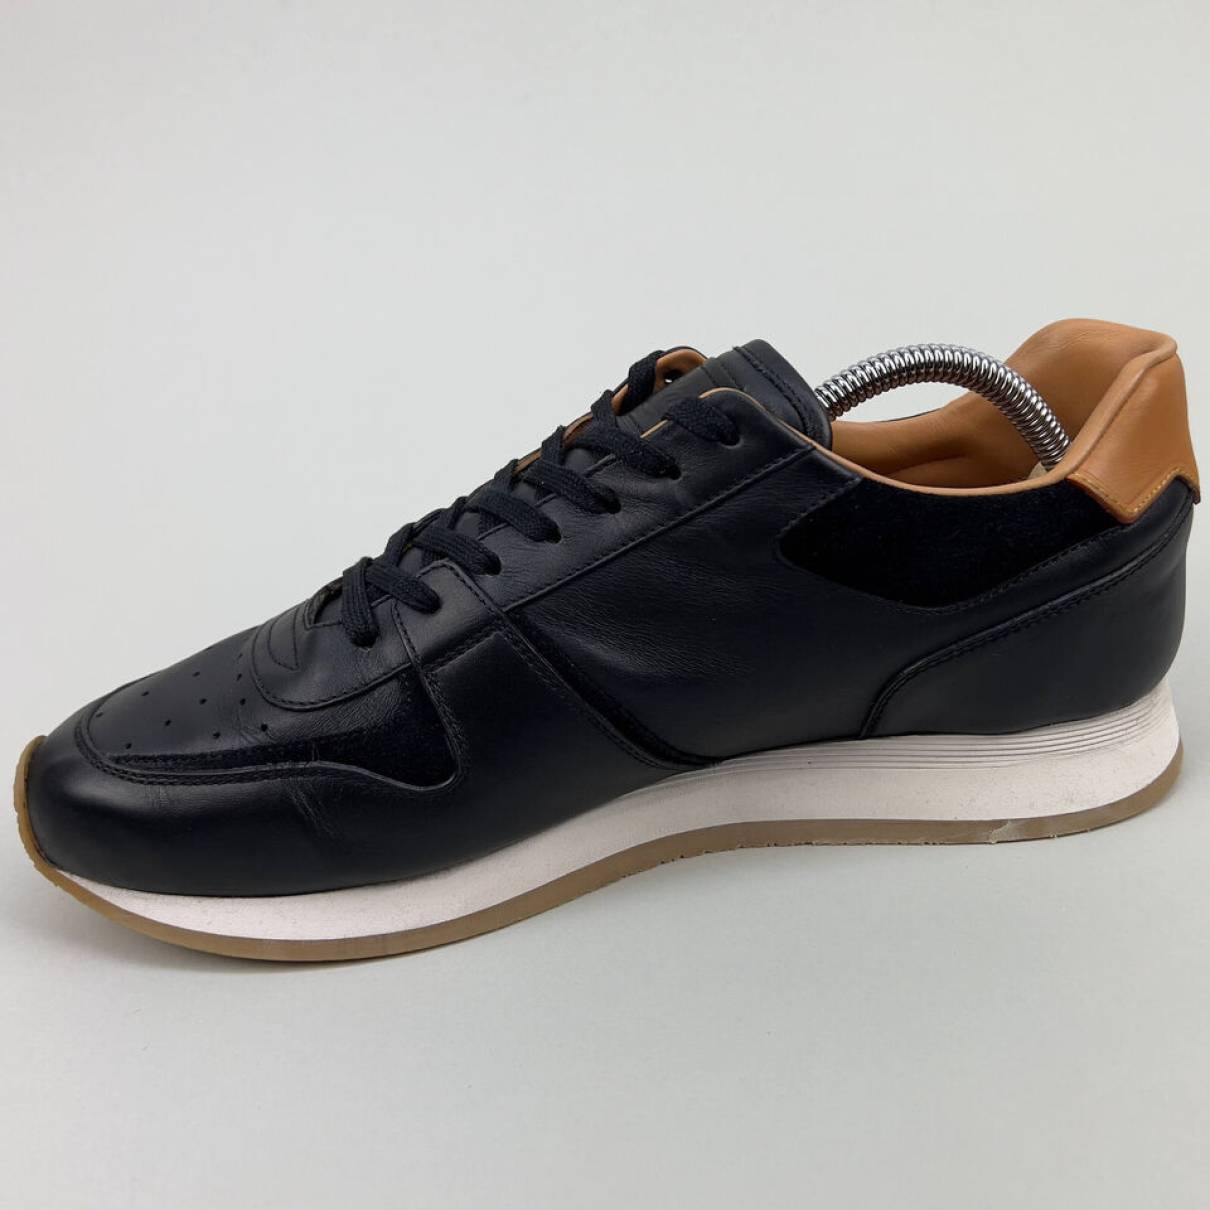 Louis Vuitton - Authenticated Run Away Trainer - Leather Black for Men, Good Condition